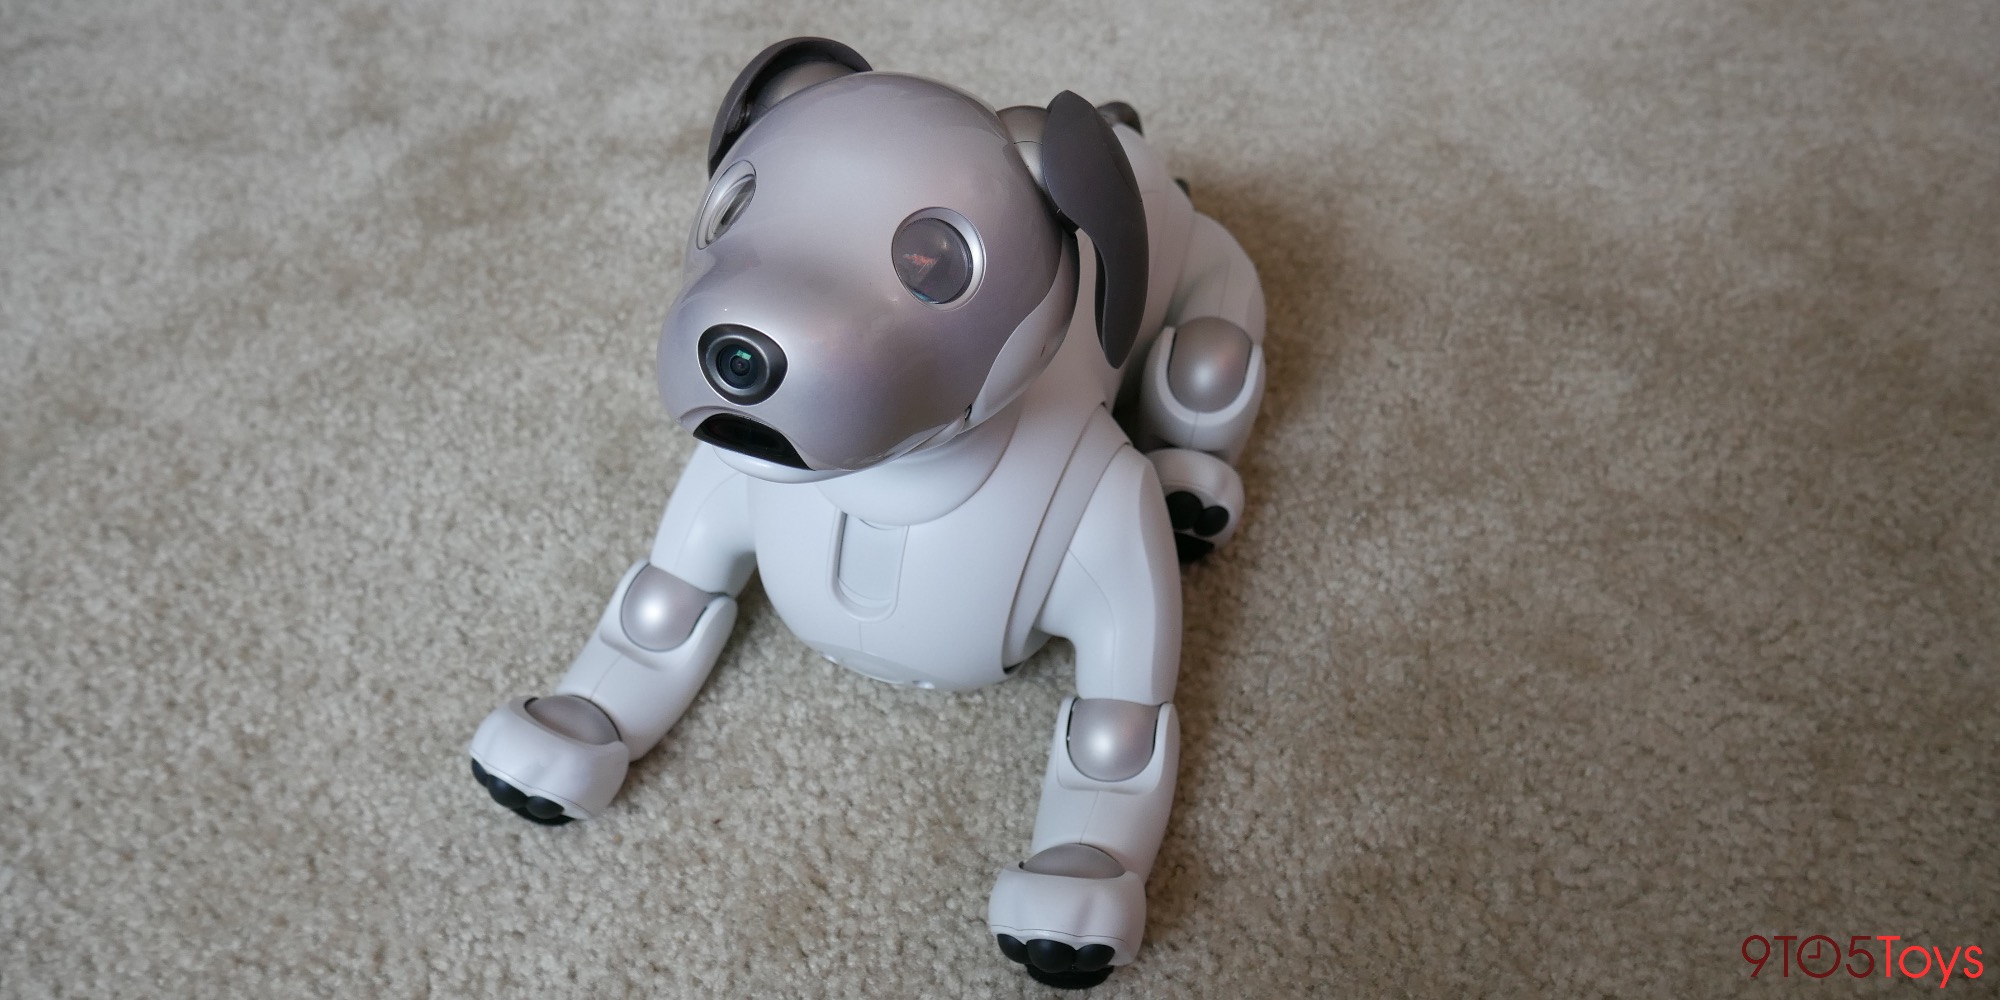 Sony aibo review: a look into the future of home robotics - 9to5Toys